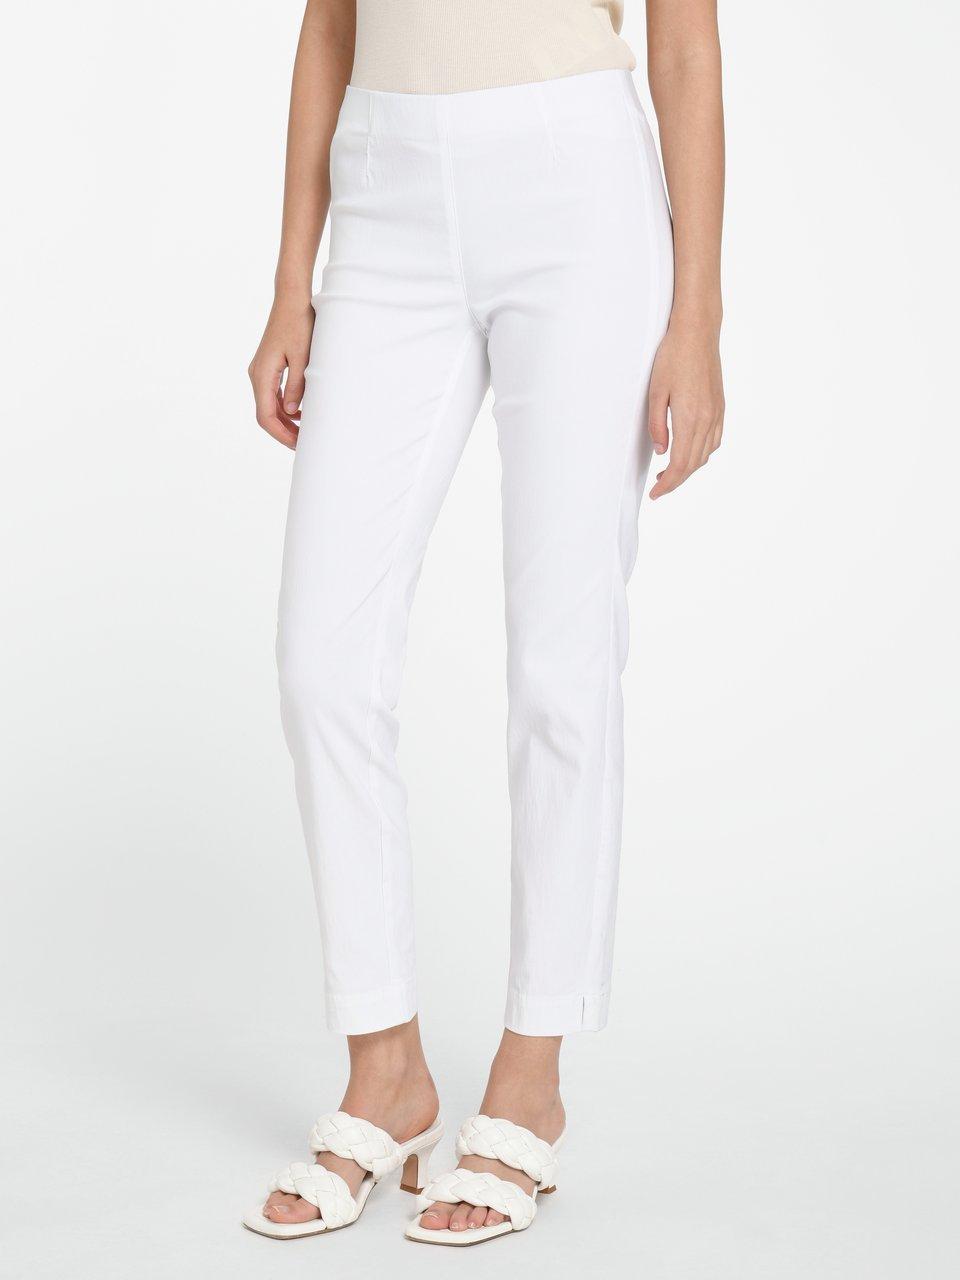 Peter Hahn - Trousers Sylvia fit - white